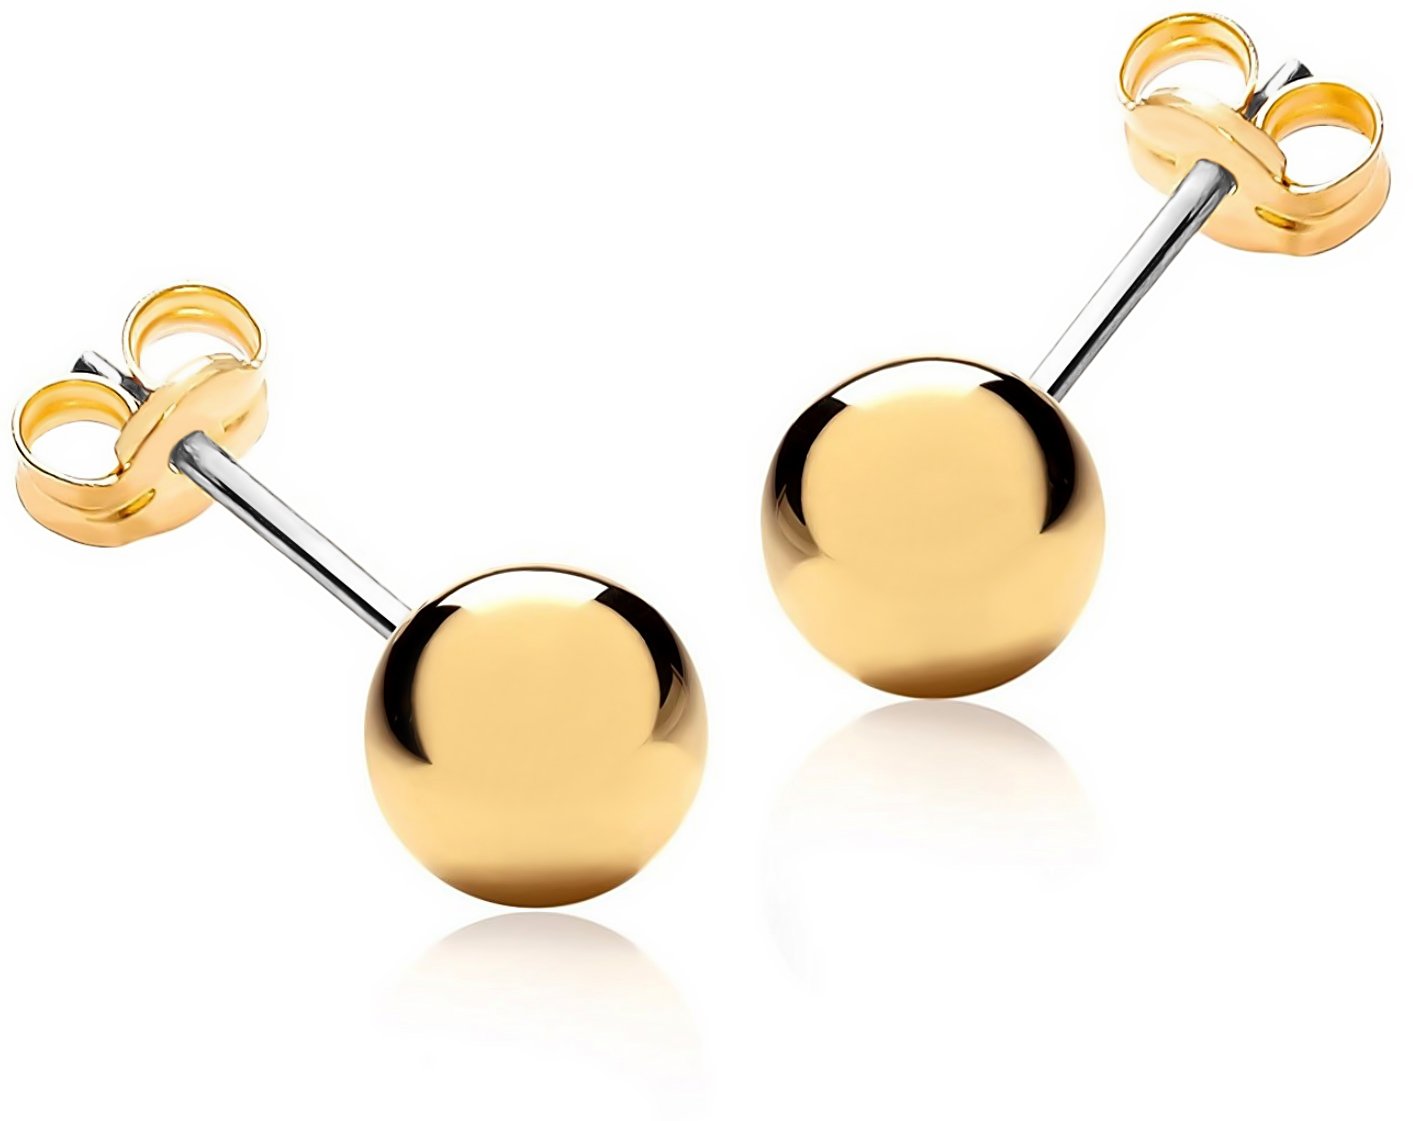 LIFETIME JEWELRY 6mm Ball Stud Earrings 24k Real Gold Plated for Women and Men